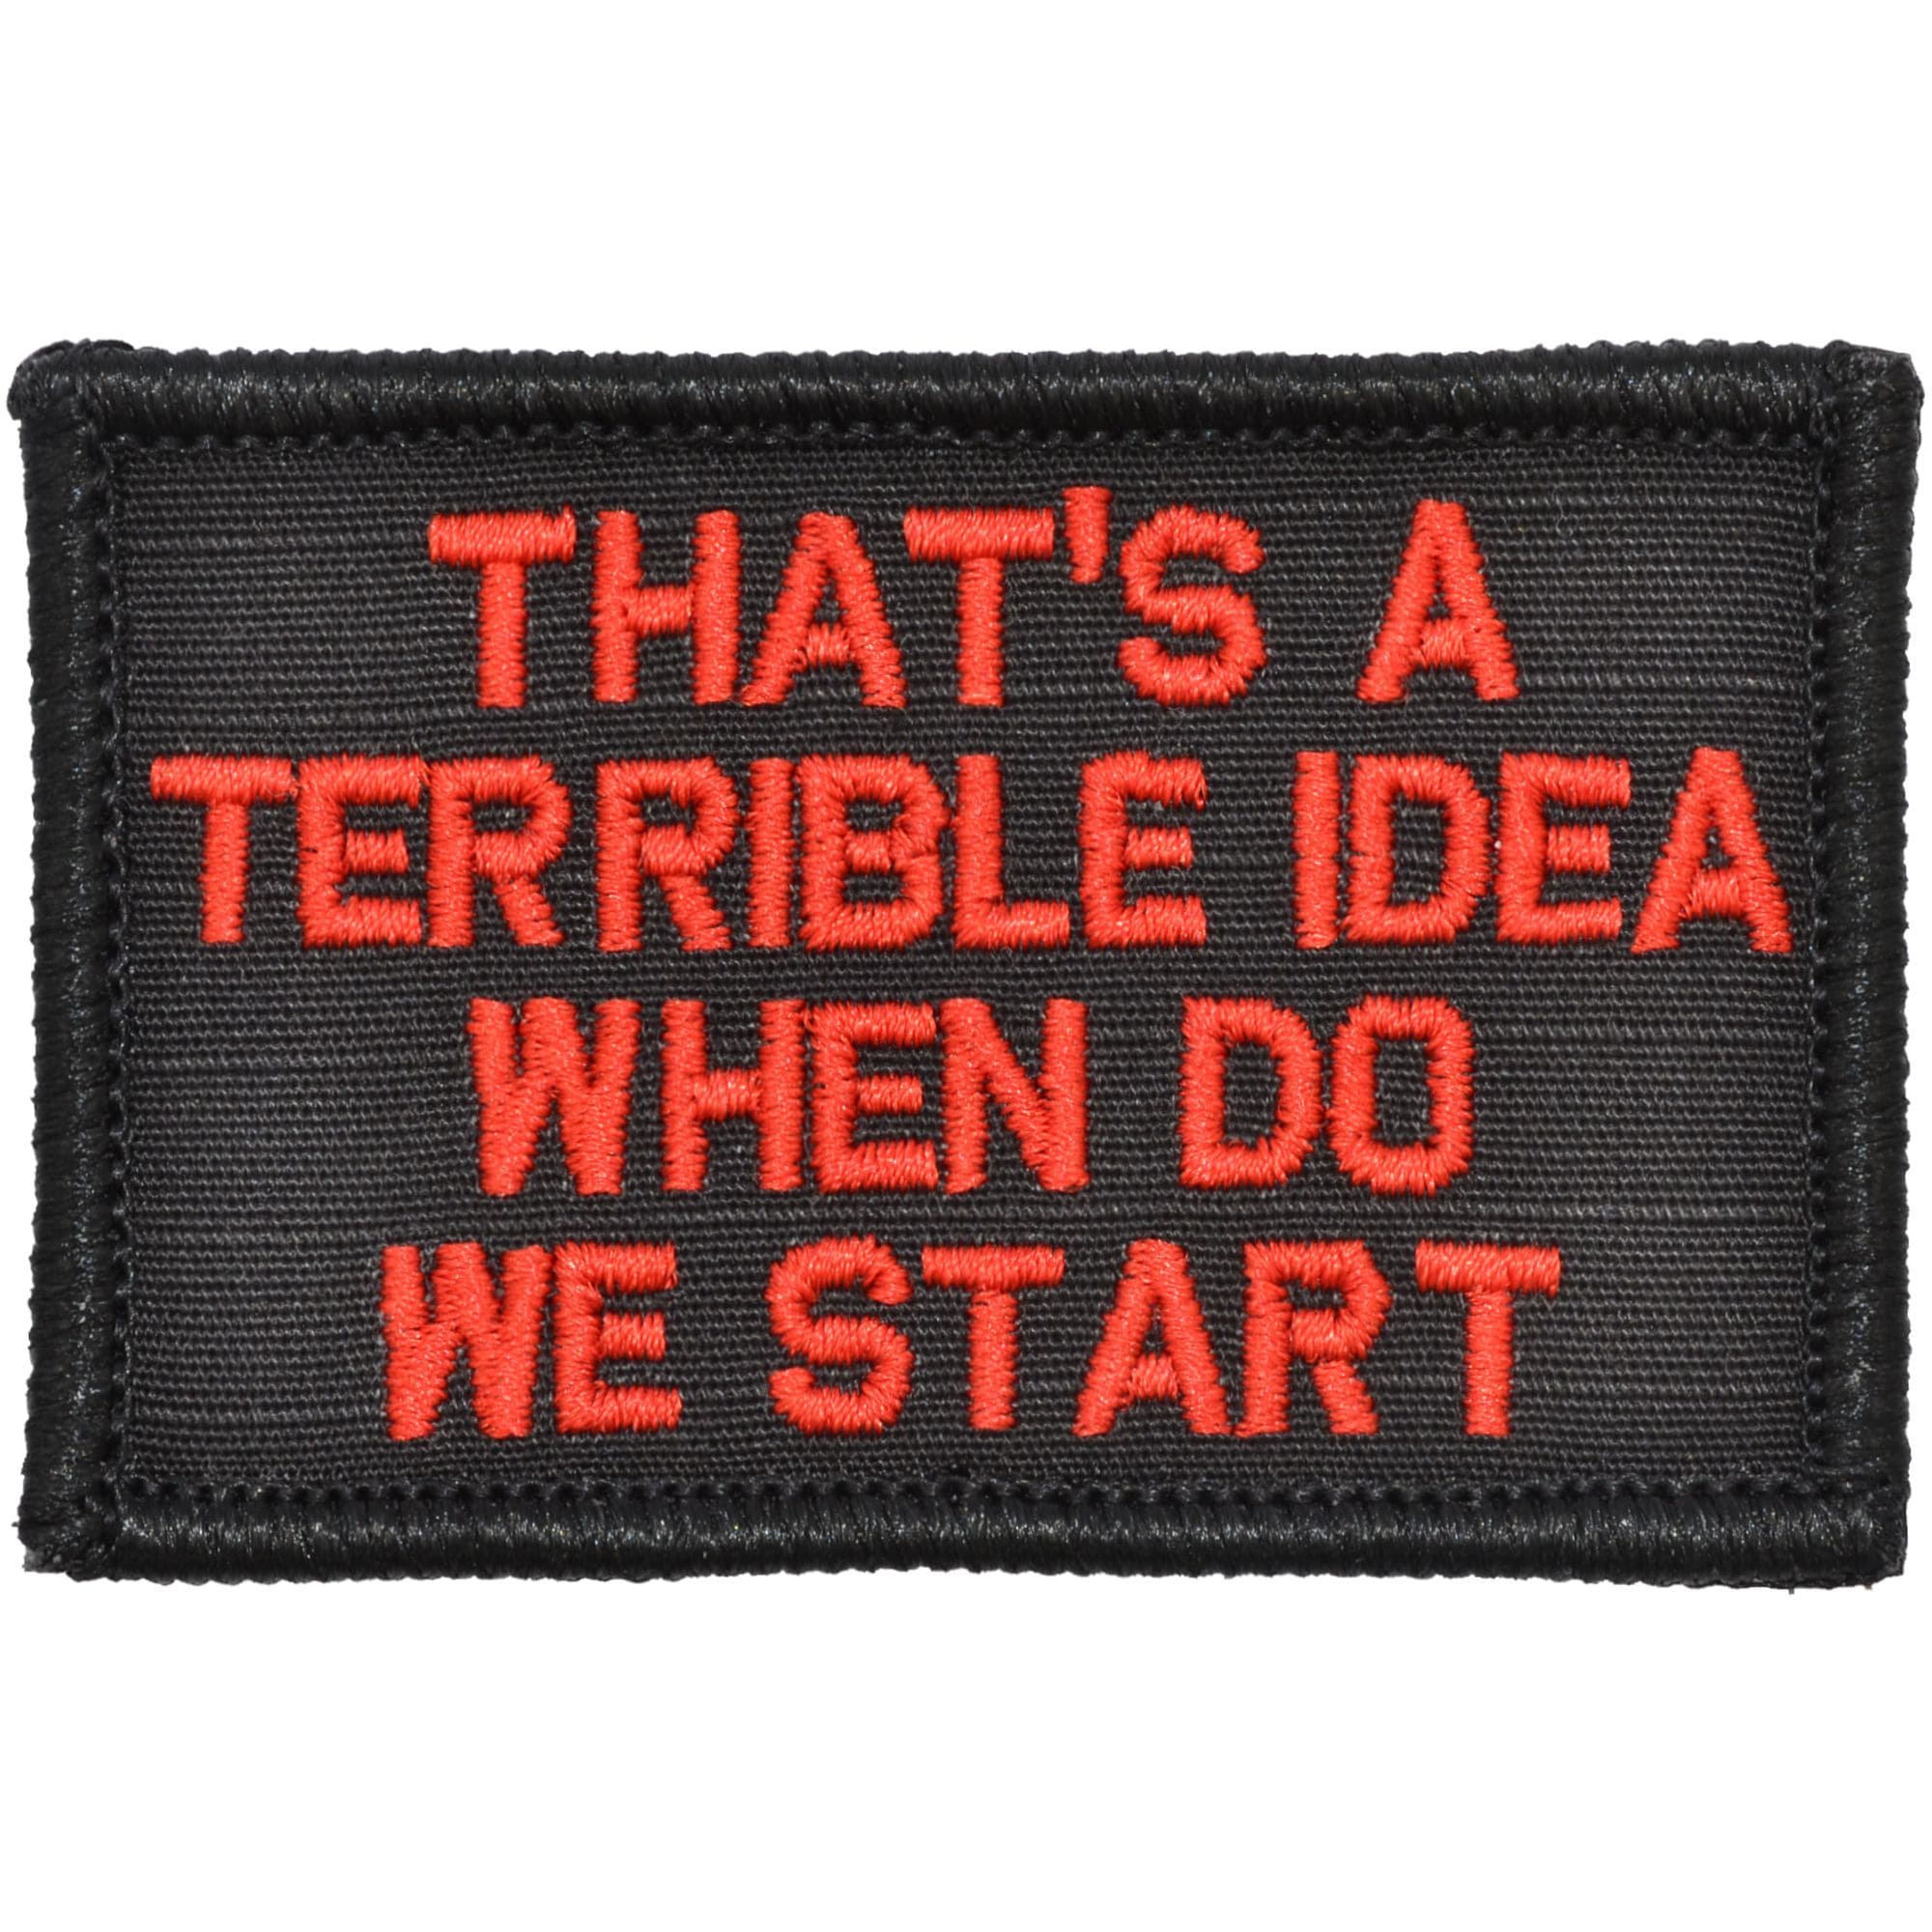 Tactical Gear Junkie Patches Black w/ Red That's a Terrible Idea When Do We Start - 2x3 Patch